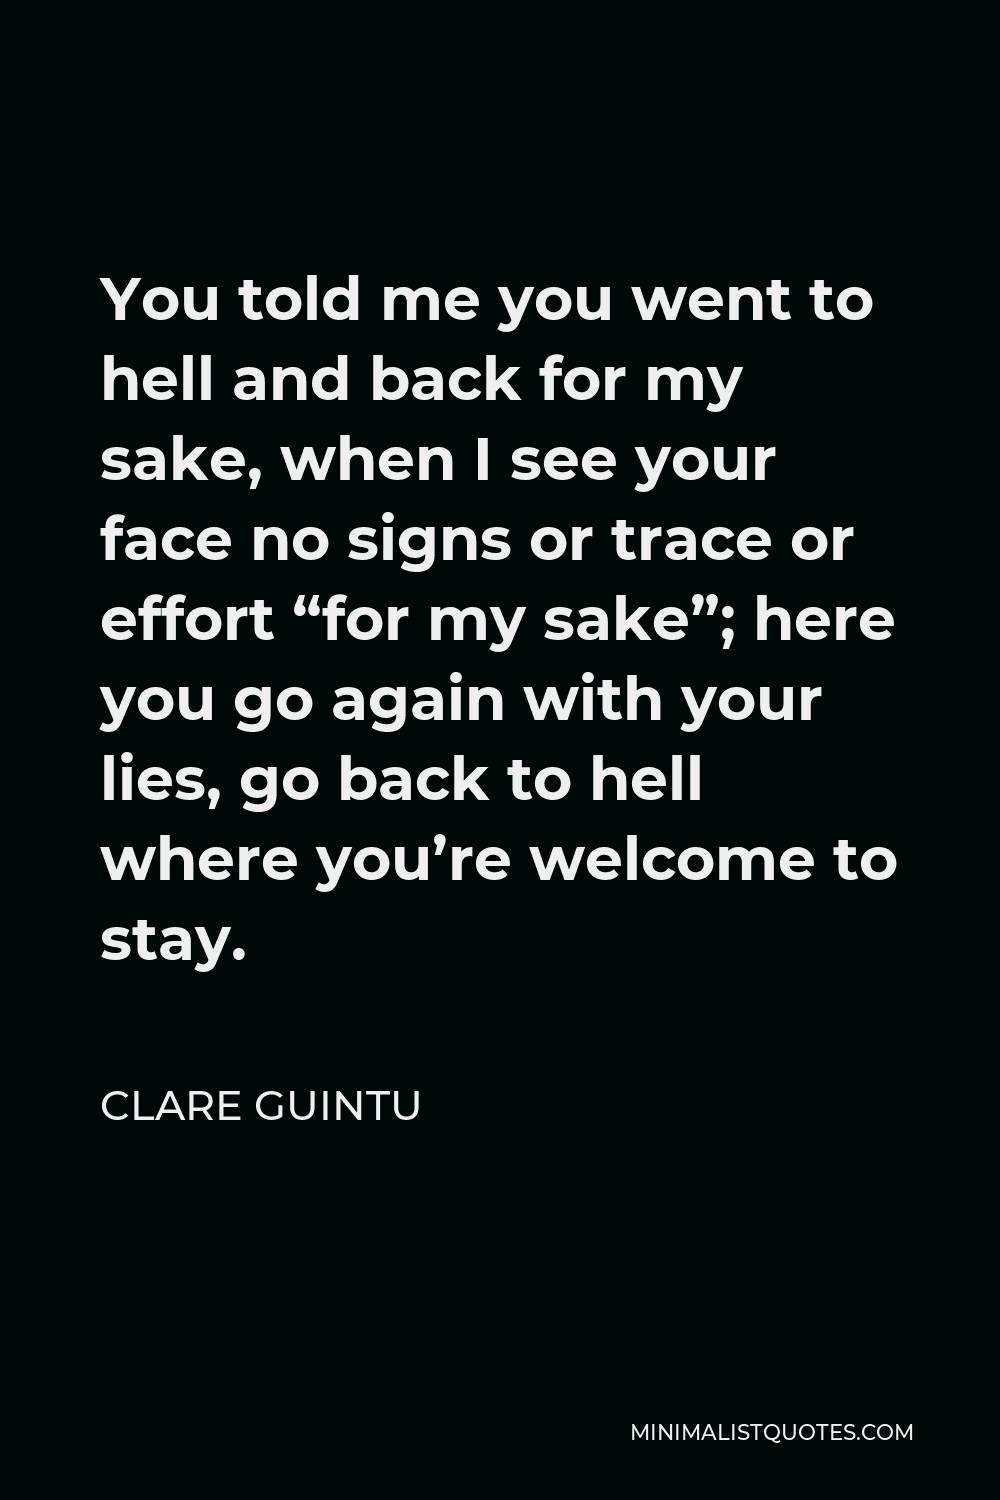 Clare Guintu Quote - You told me you went to hell and back for my sake, when I see your face no signs or trace or effort “for my sake”; here you go again with your lies, go back to hell where you’re welcome to stay.